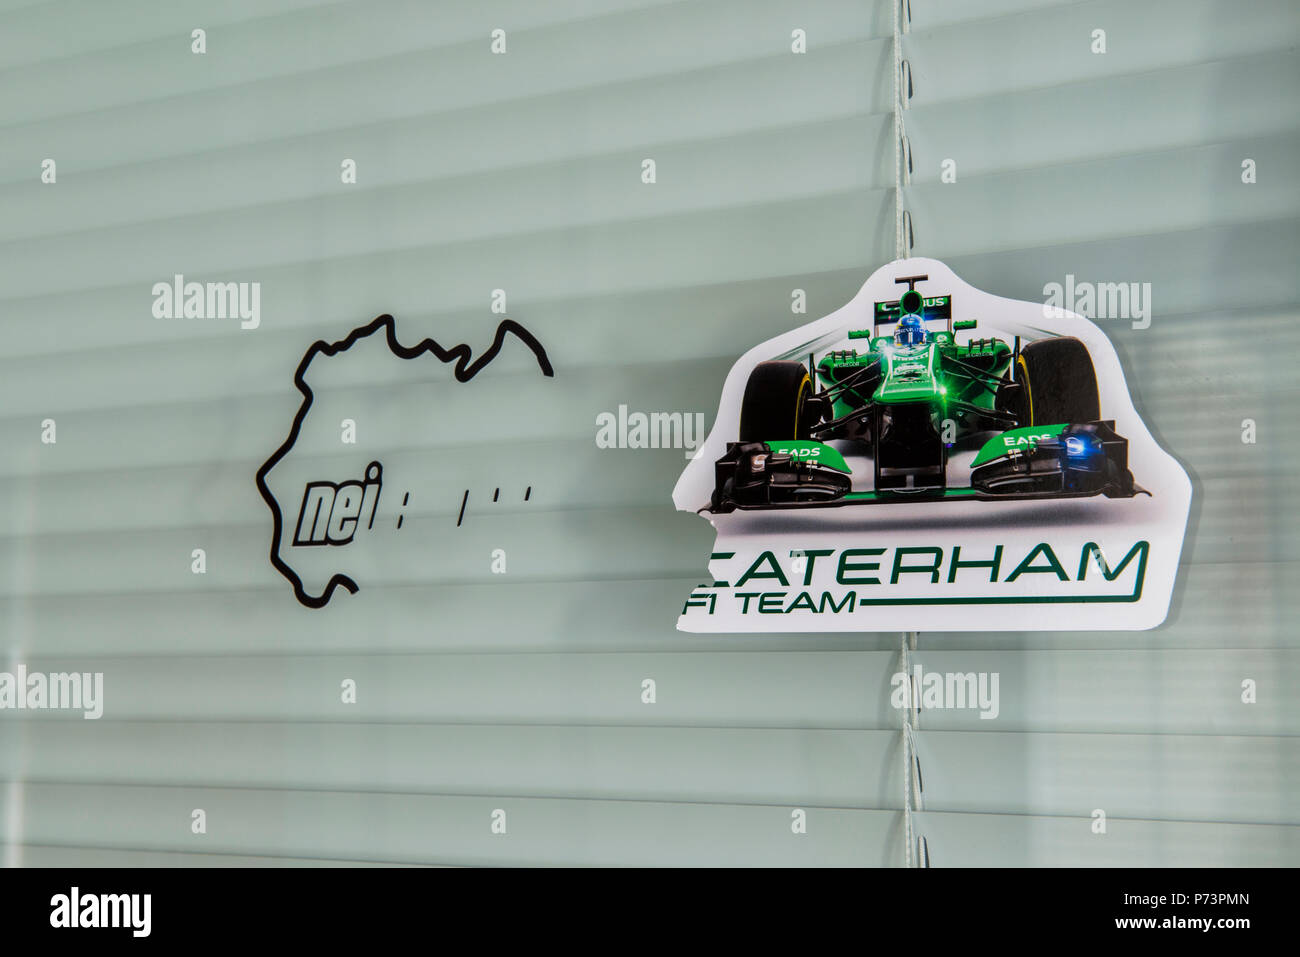 Former Caterham F1 headquarters in Leafield, Oxfordshire, UK. Image taken two years after the company went into administration. Stock Photo